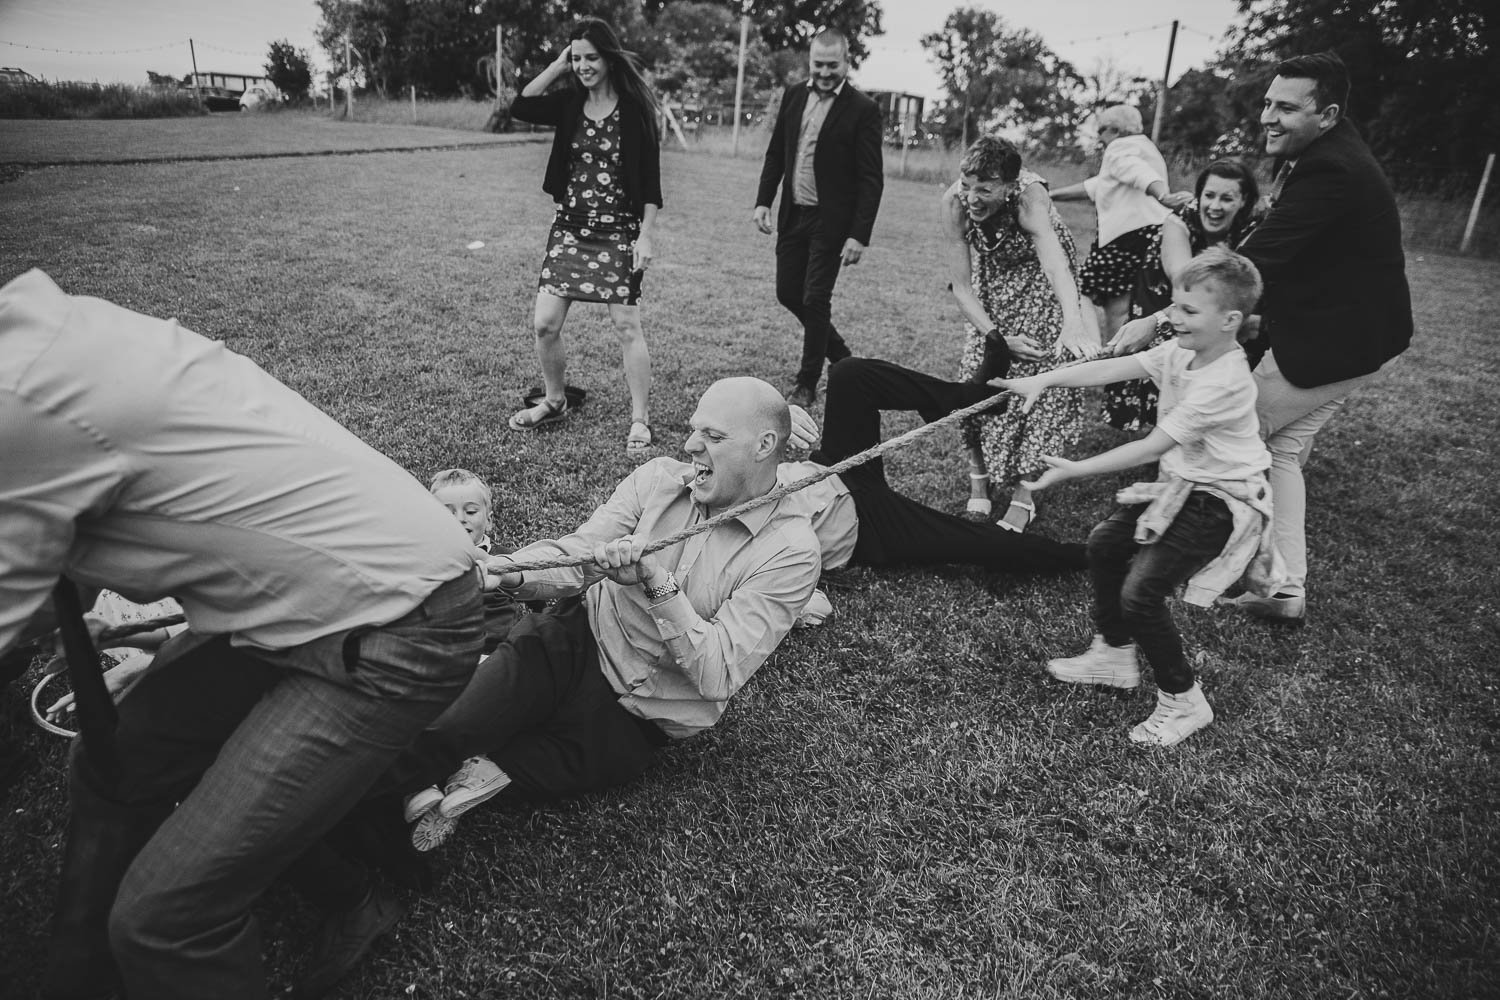 People falling over in a game of tug of war at a wedding.